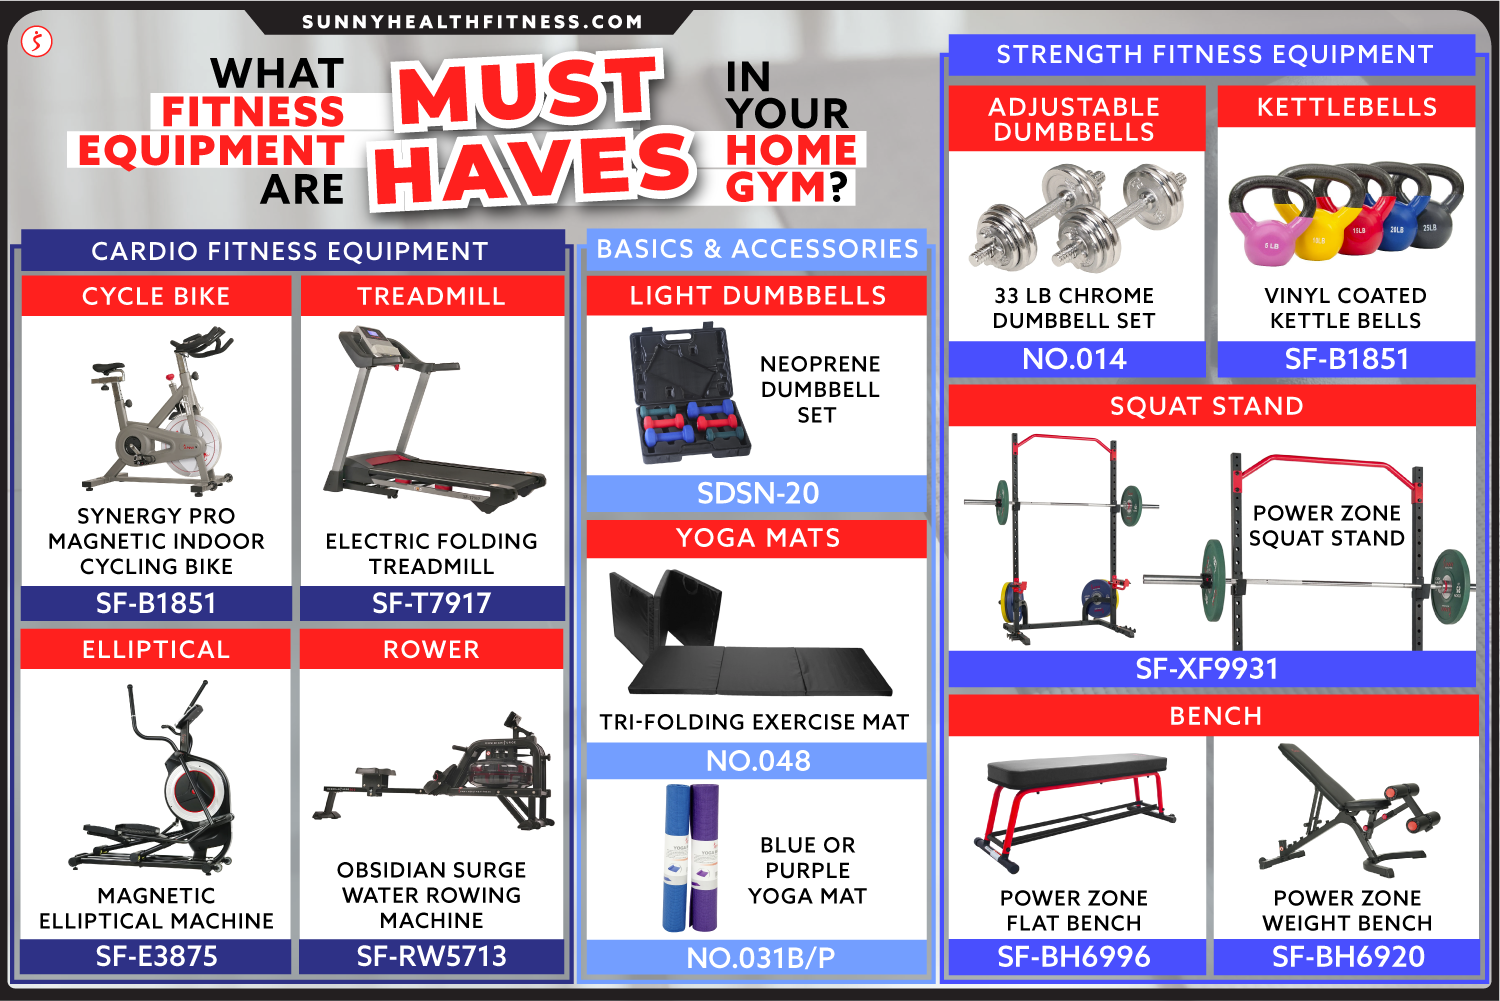 Fit Fam Home Gym Must Haves